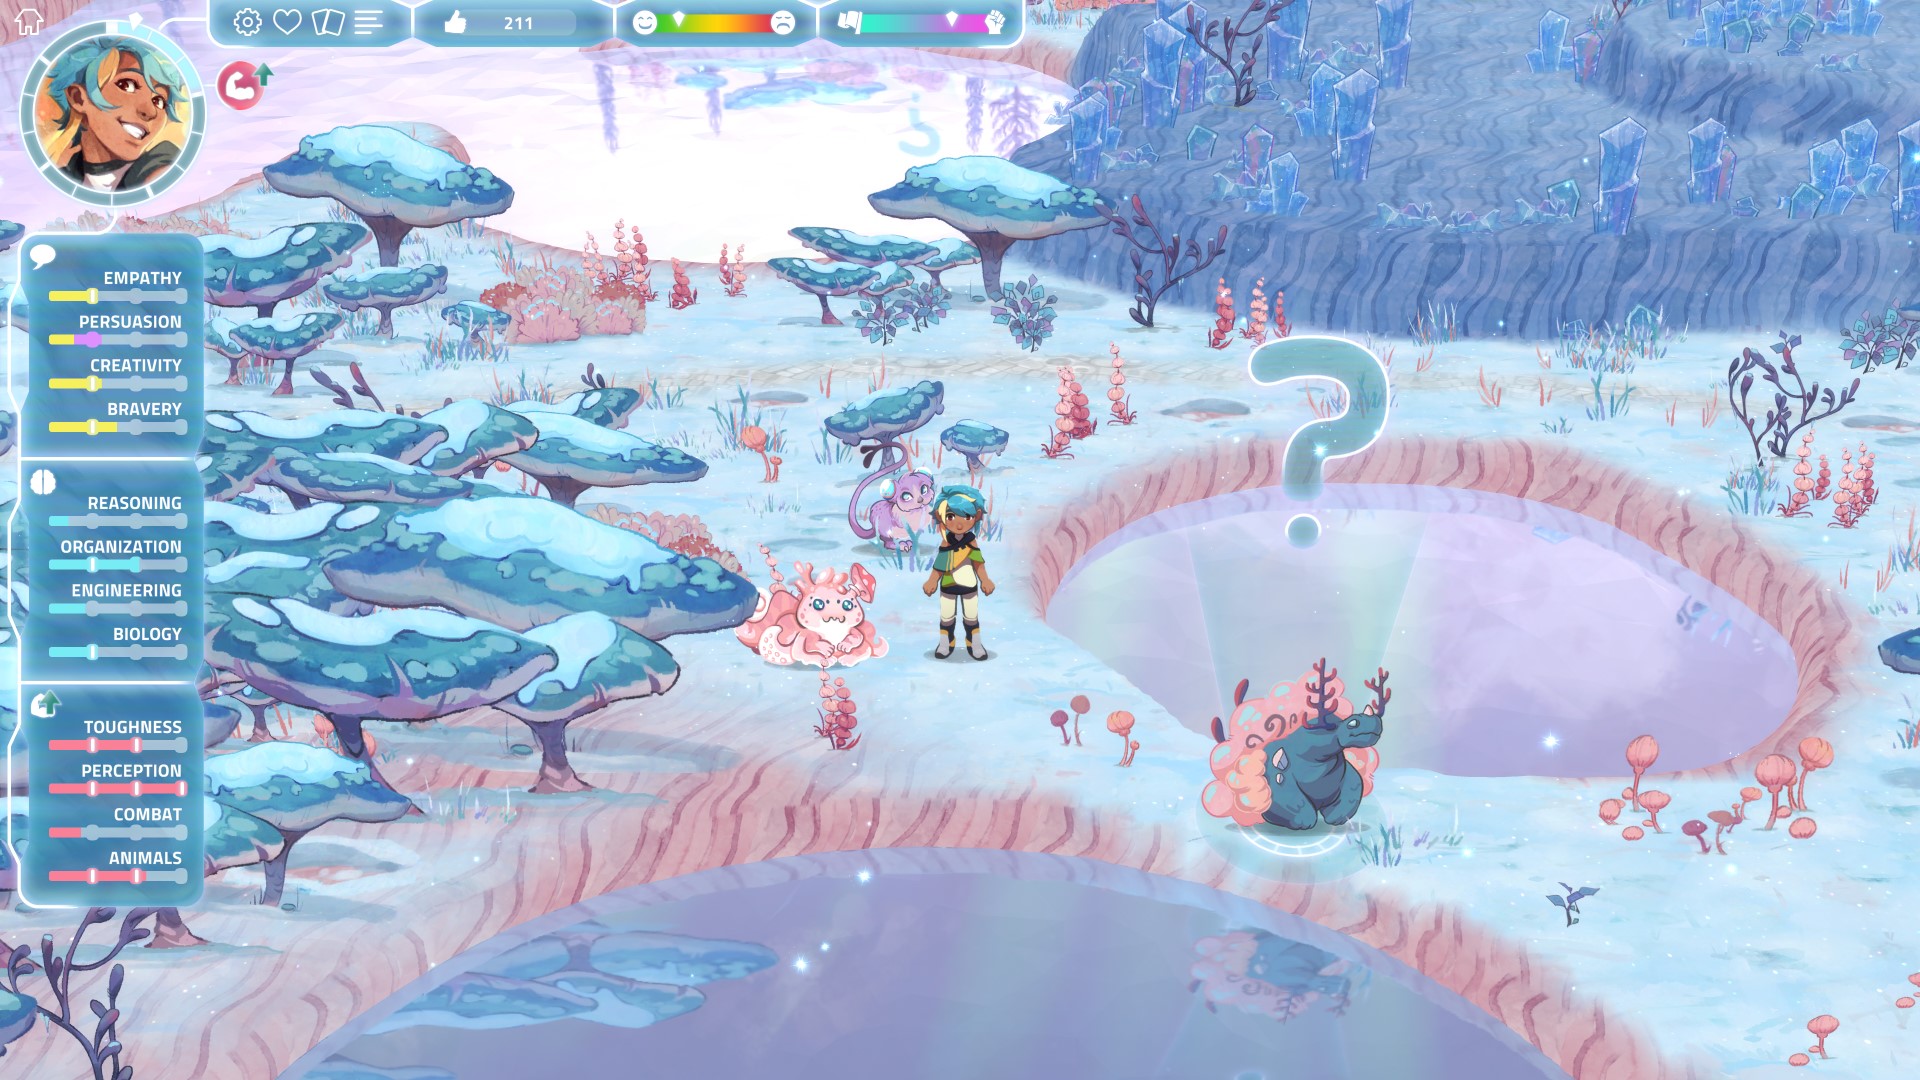 Screenshot from I Was a Teenage Exocolonist of the main character standing out in snow with various animals. The palette is pastel pinks and blues